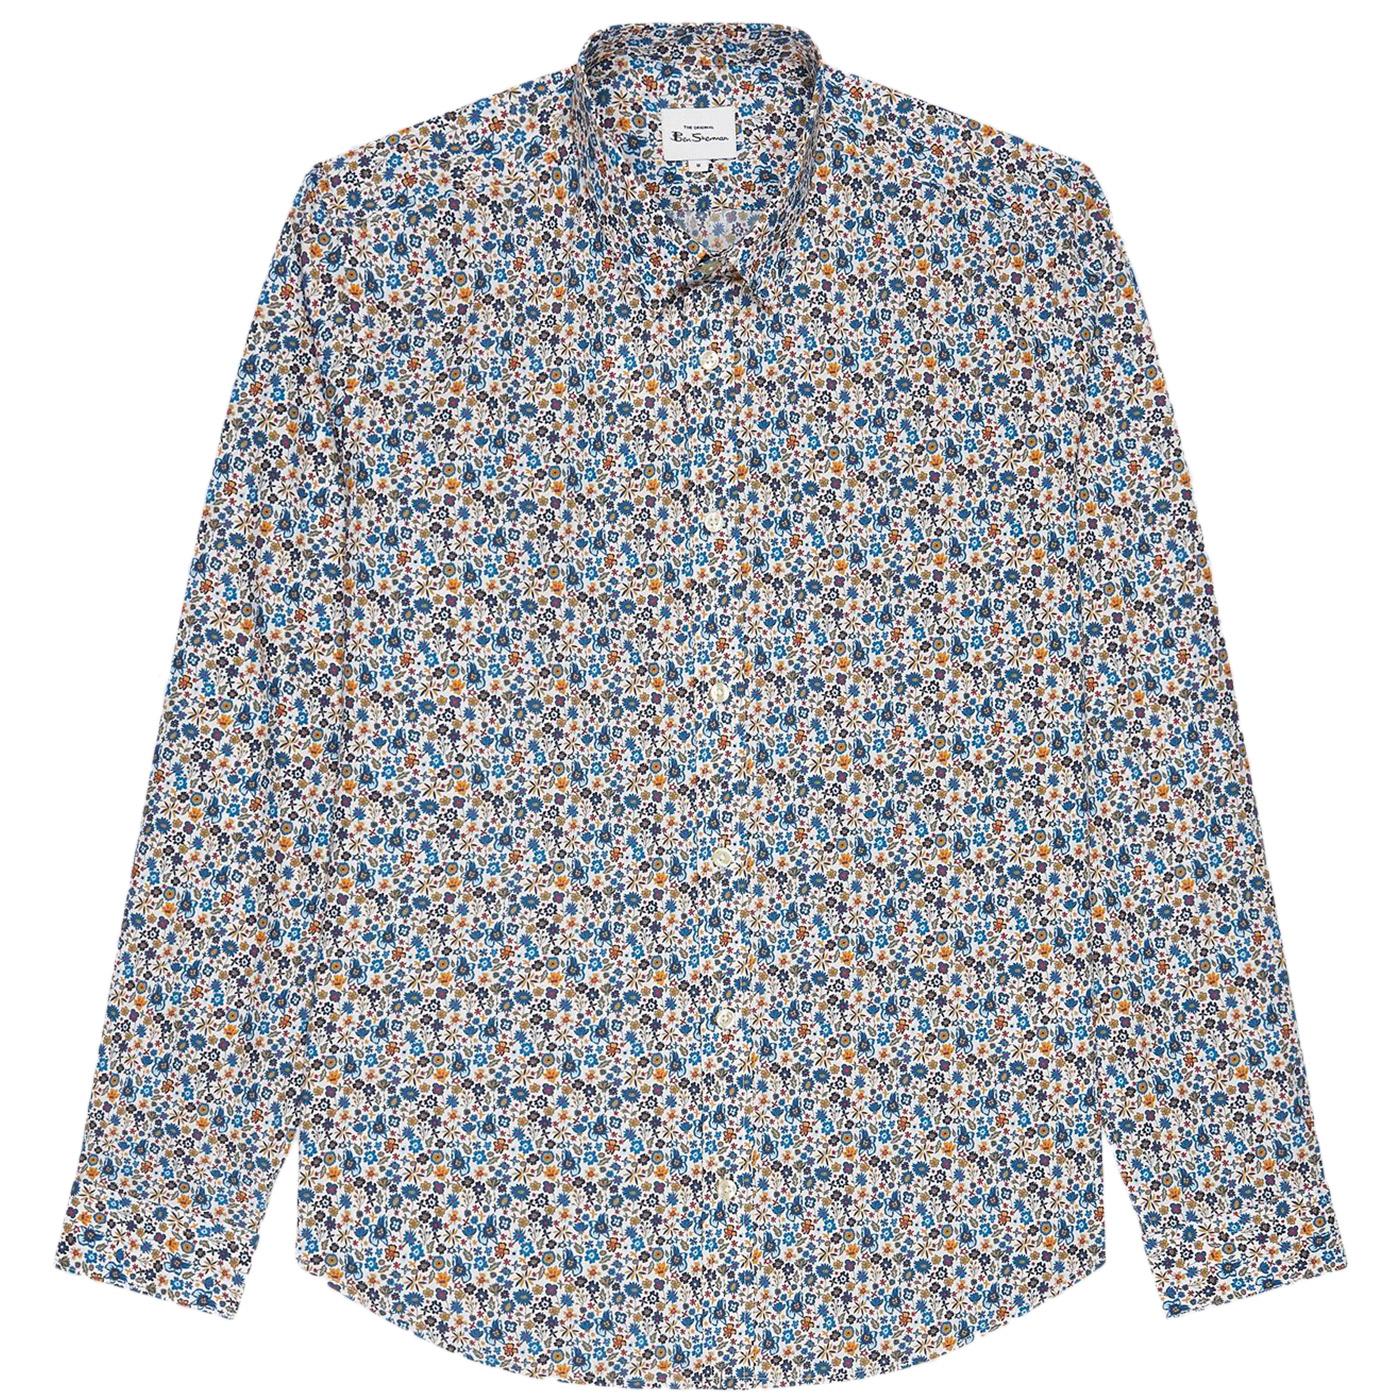 BEN SHERMAN 1960s Mod Multicolour Floral Shirt in Ivory